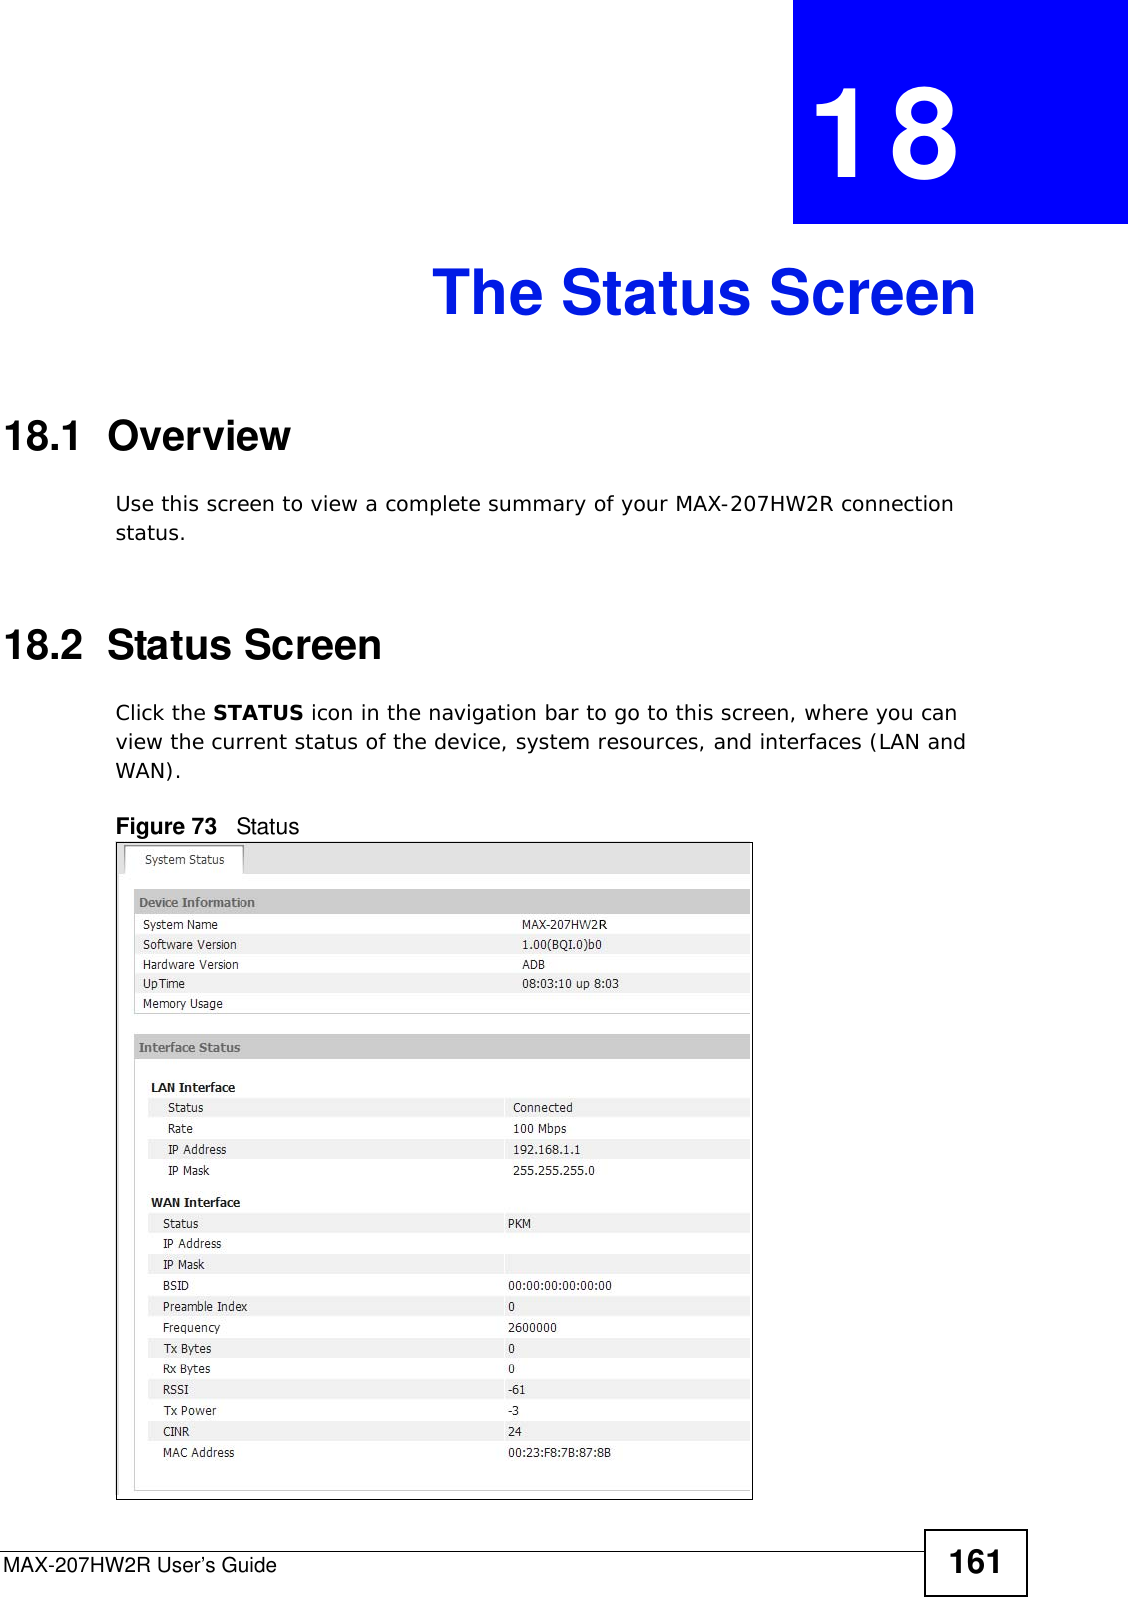 MAX-207HW2R User’s Guide 161CHAPTER  18 The Status Screen18.1  OverviewUse this screen to view a complete summary of your MAX-207HW2R connection status.18.2  Status ScreenClick the STATUS icon in the navigation bar to go to this screen, where you can view the current status of the device, system resources, and interfaces (LAN and WAN). Figure 73   Status